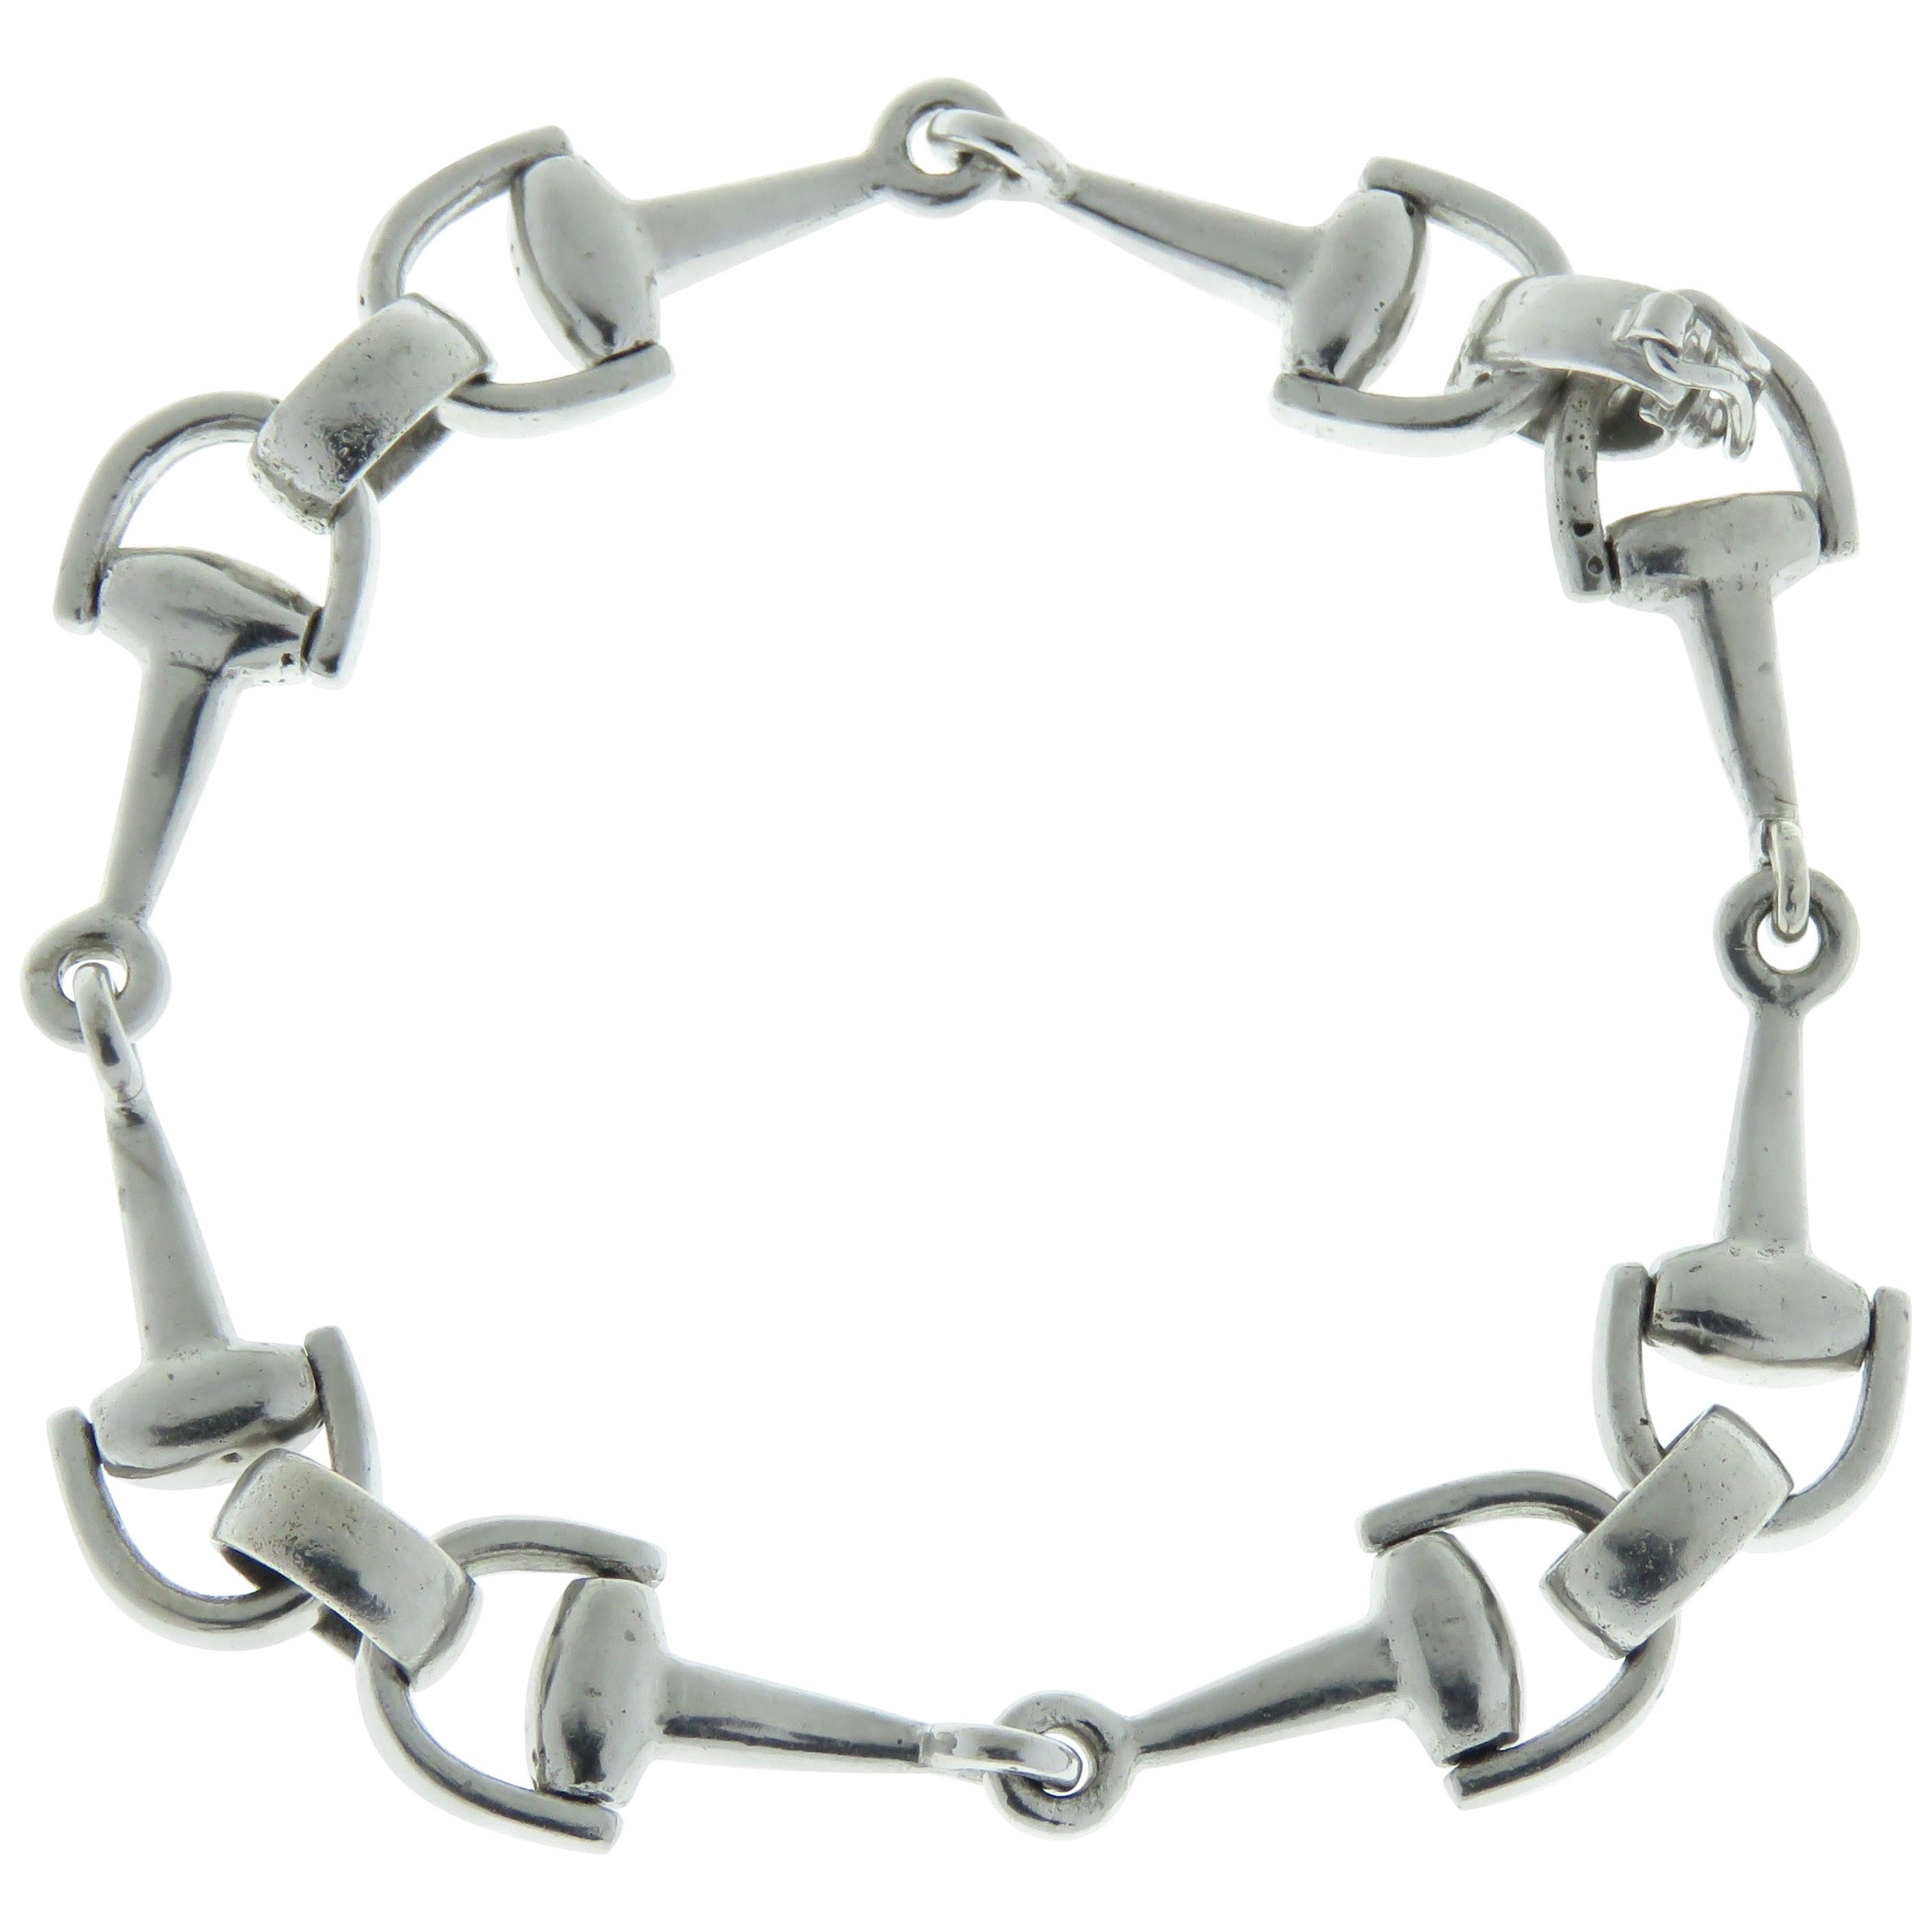 Solid Silver Horse Stirrup Bracelet Handcrafted in Italy